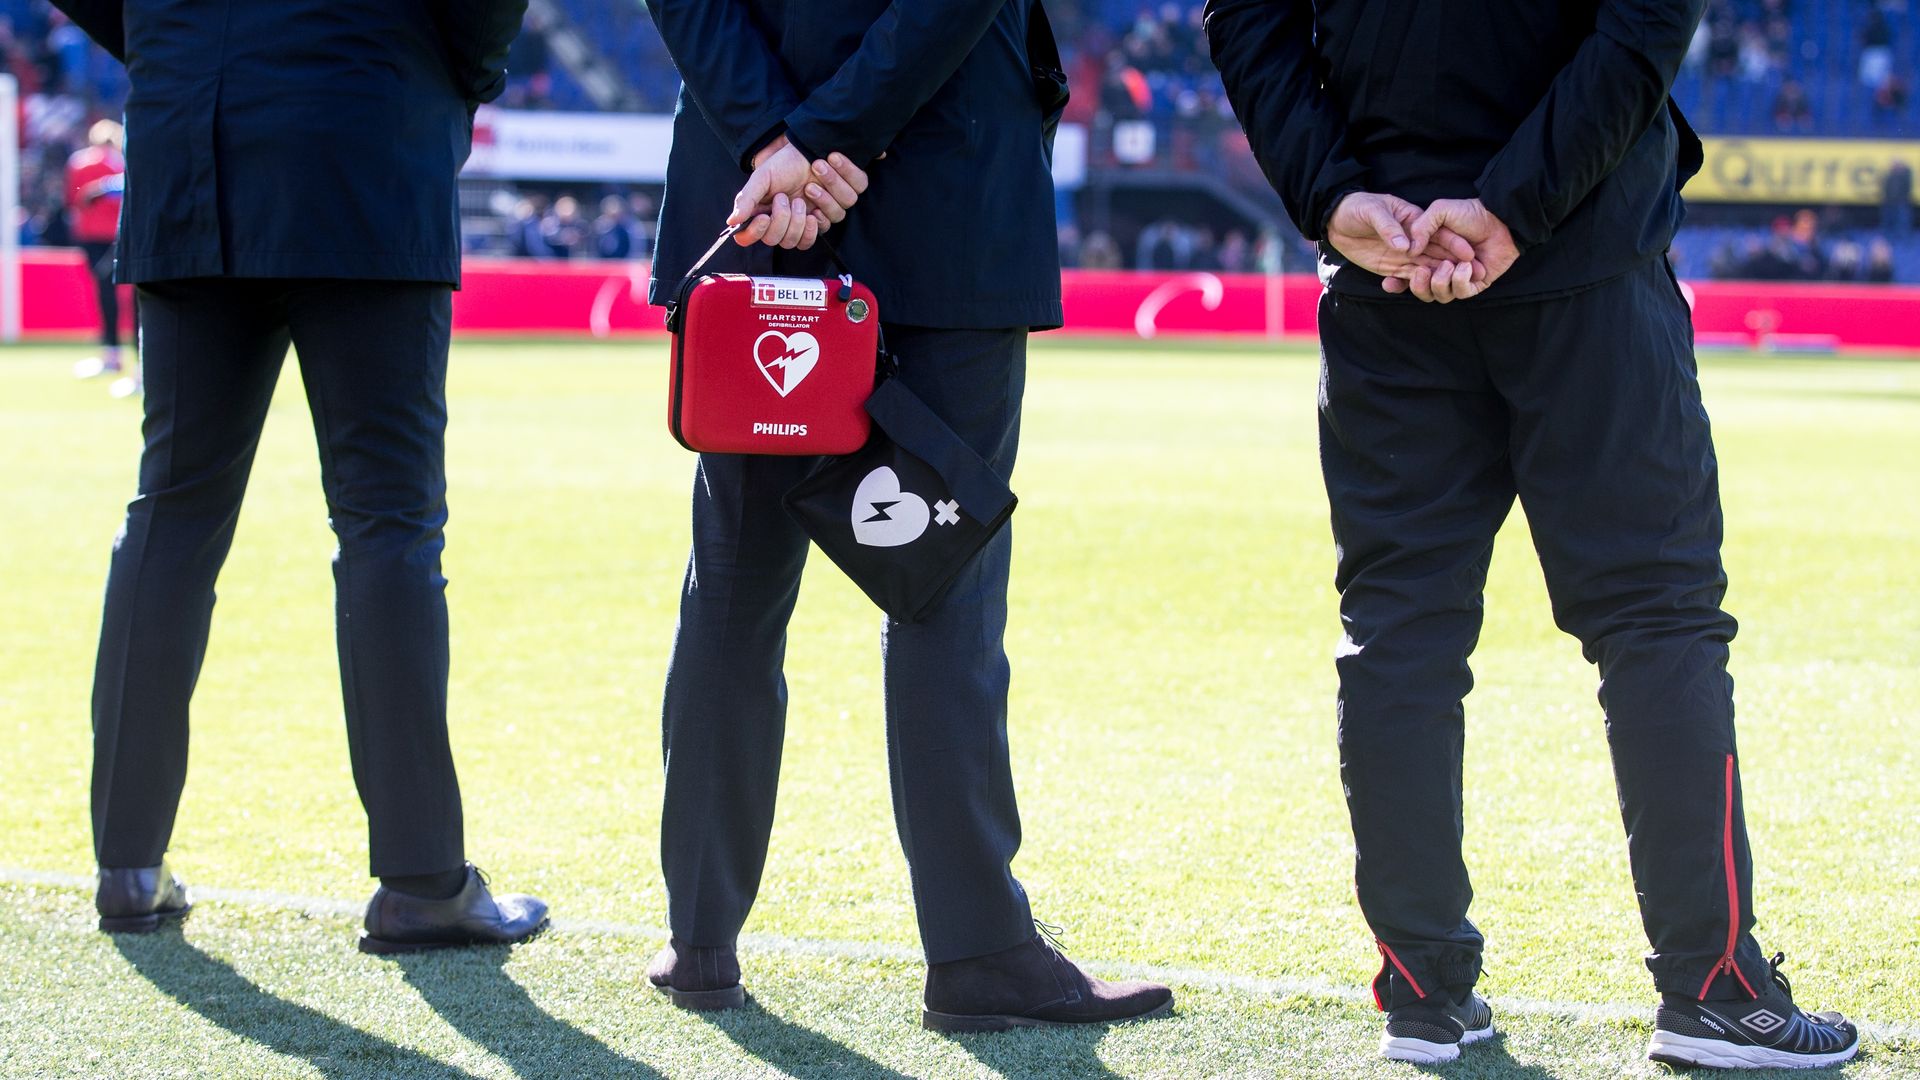 A photo of a person holding a defibrilator standing on a soccer pitch